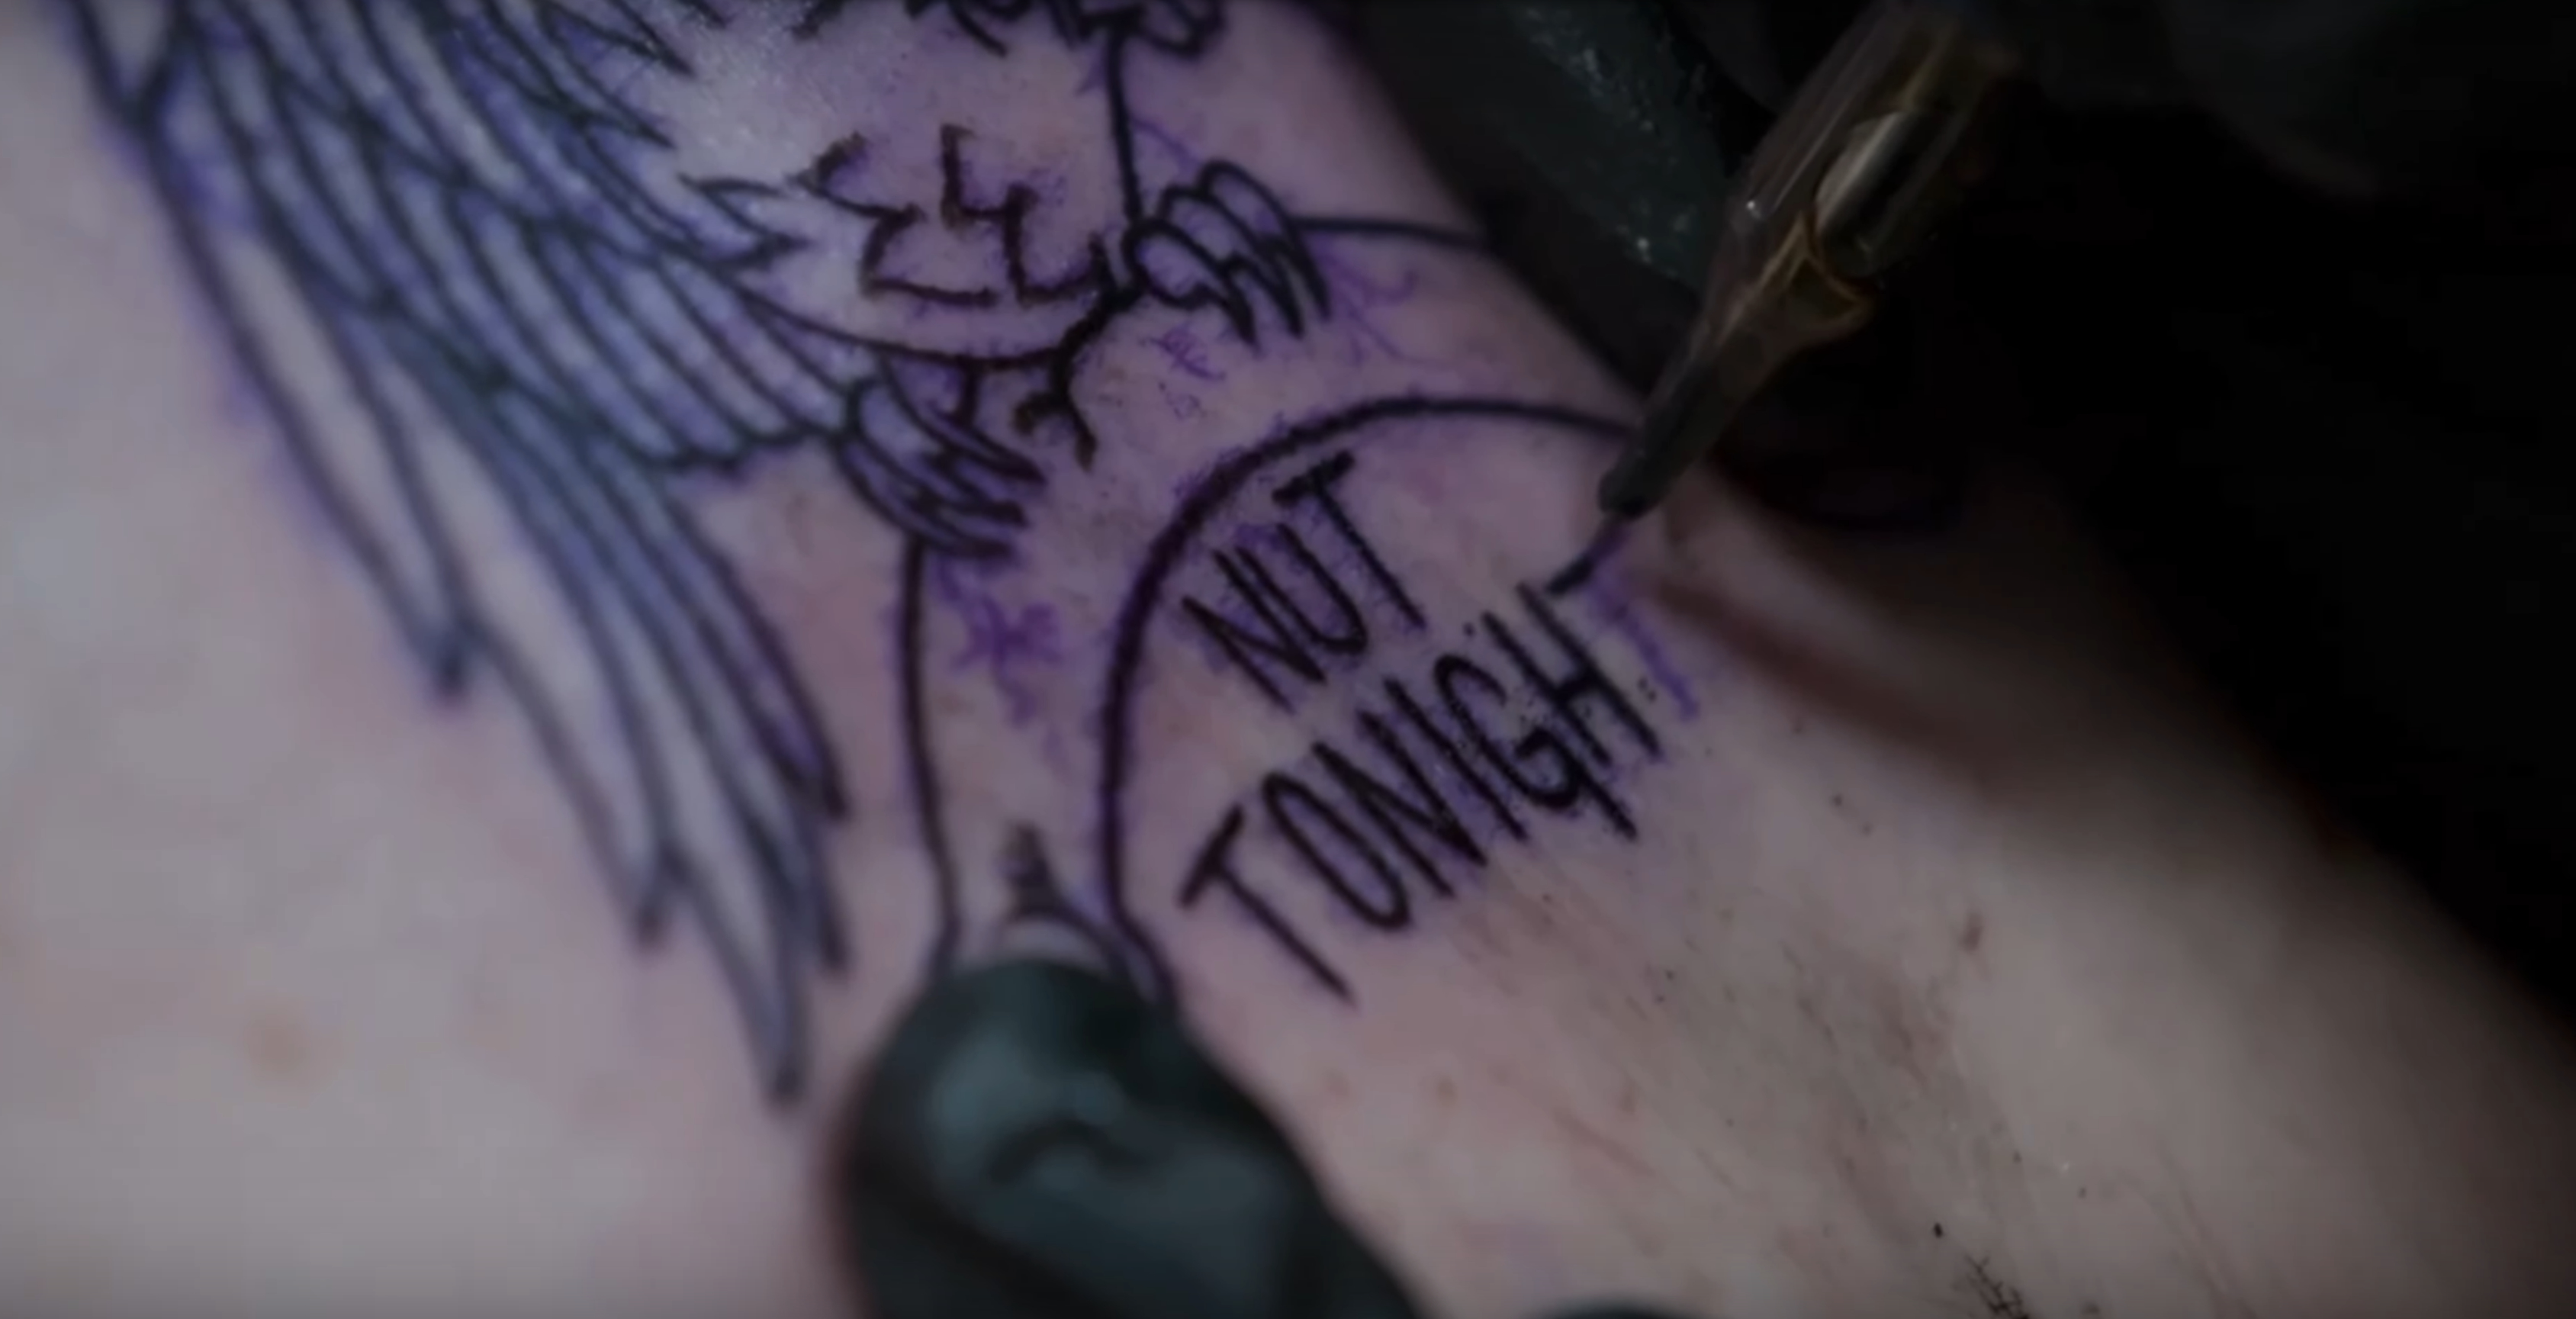 Anna Phylactic getting a tattoo that reads &quot;NUT TONIGHT.&quot;